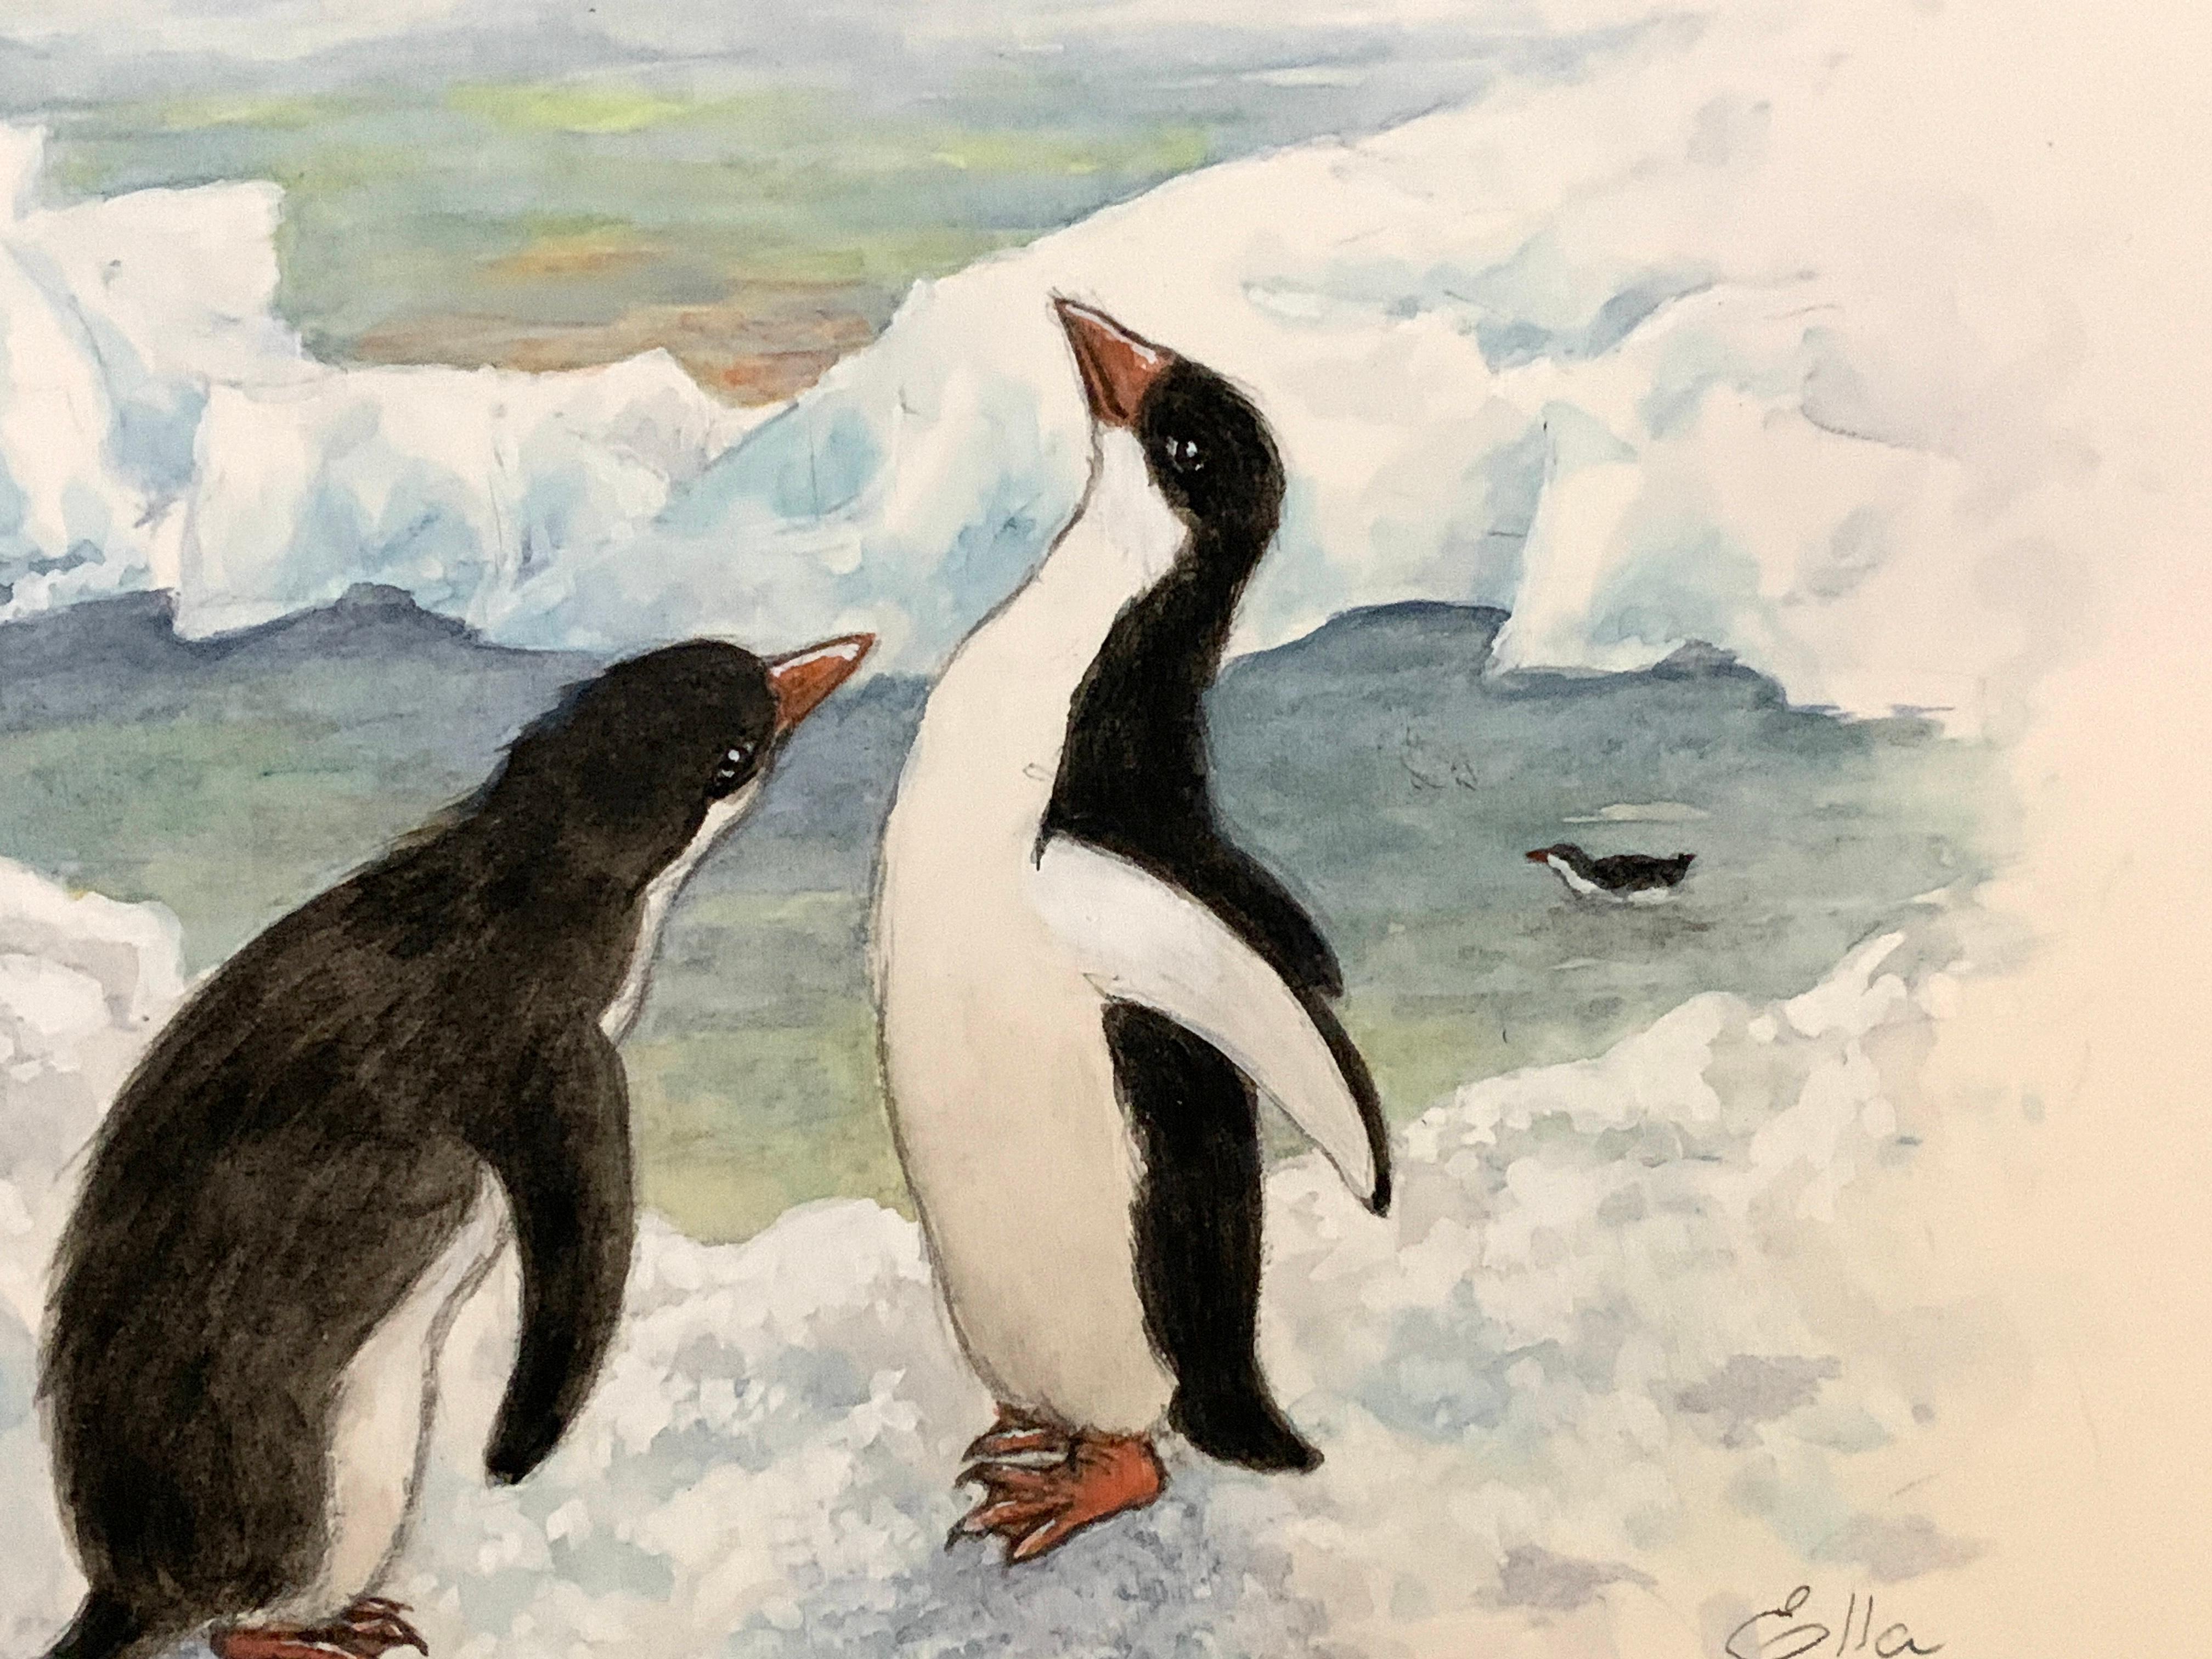 Christmas Winter English watercolor of two Penguins in the Antarctic  - Art by Ella Bruce